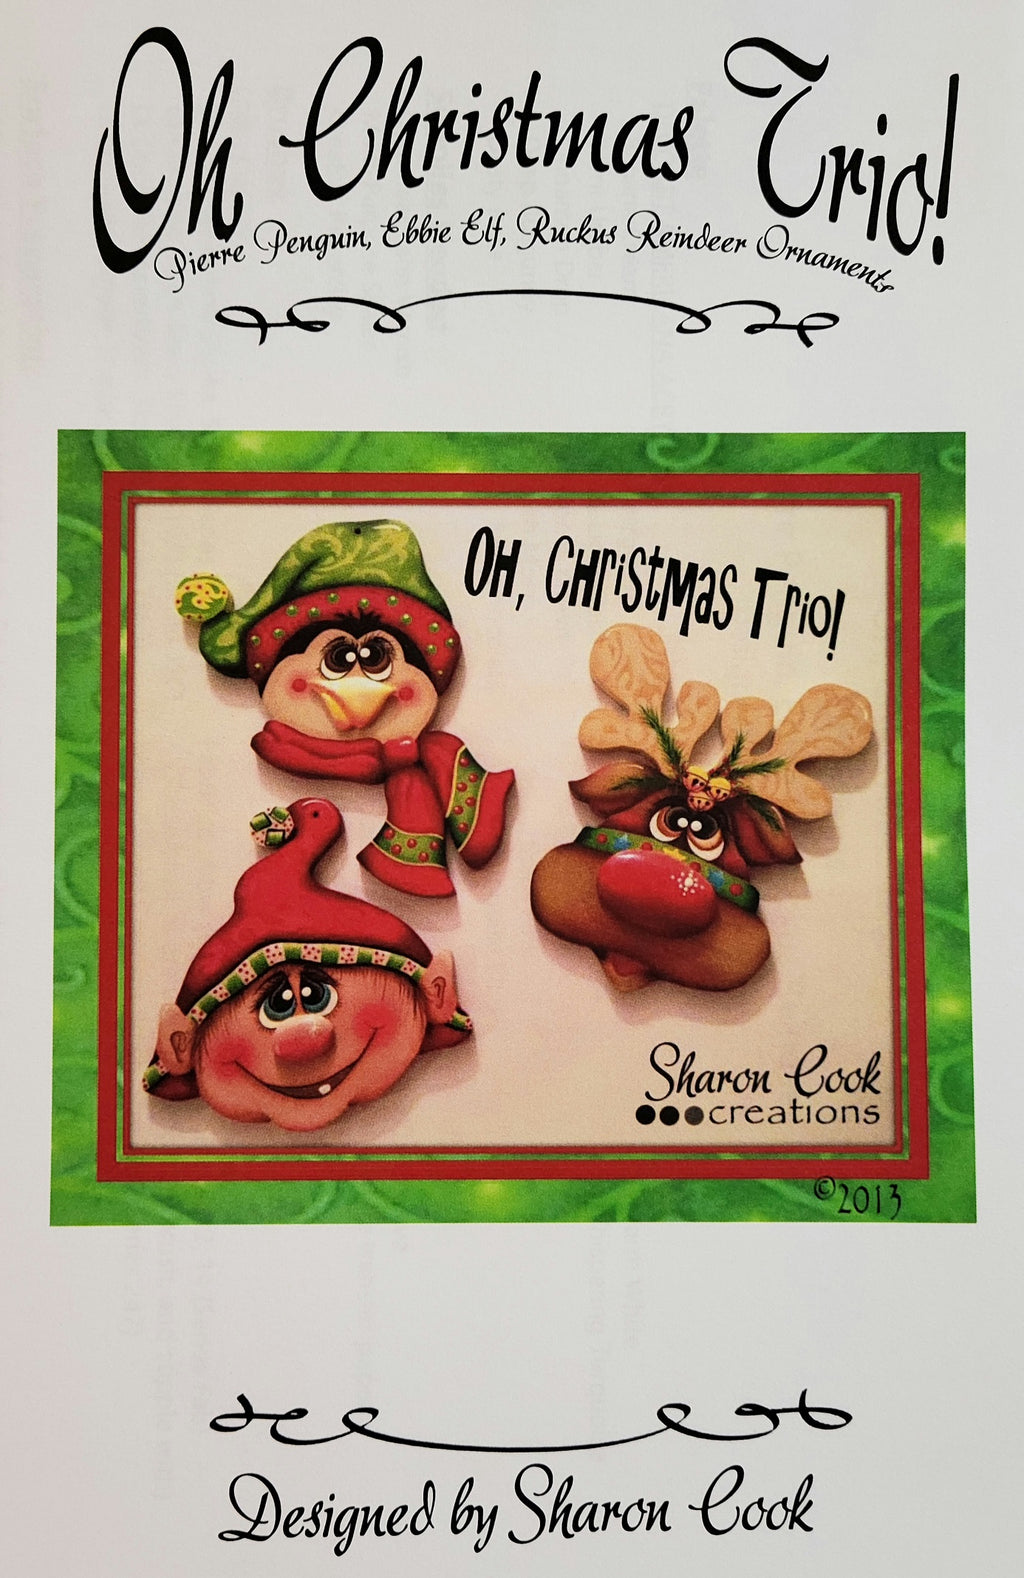 Oh Christmas Trio! packet by Sharon Cook